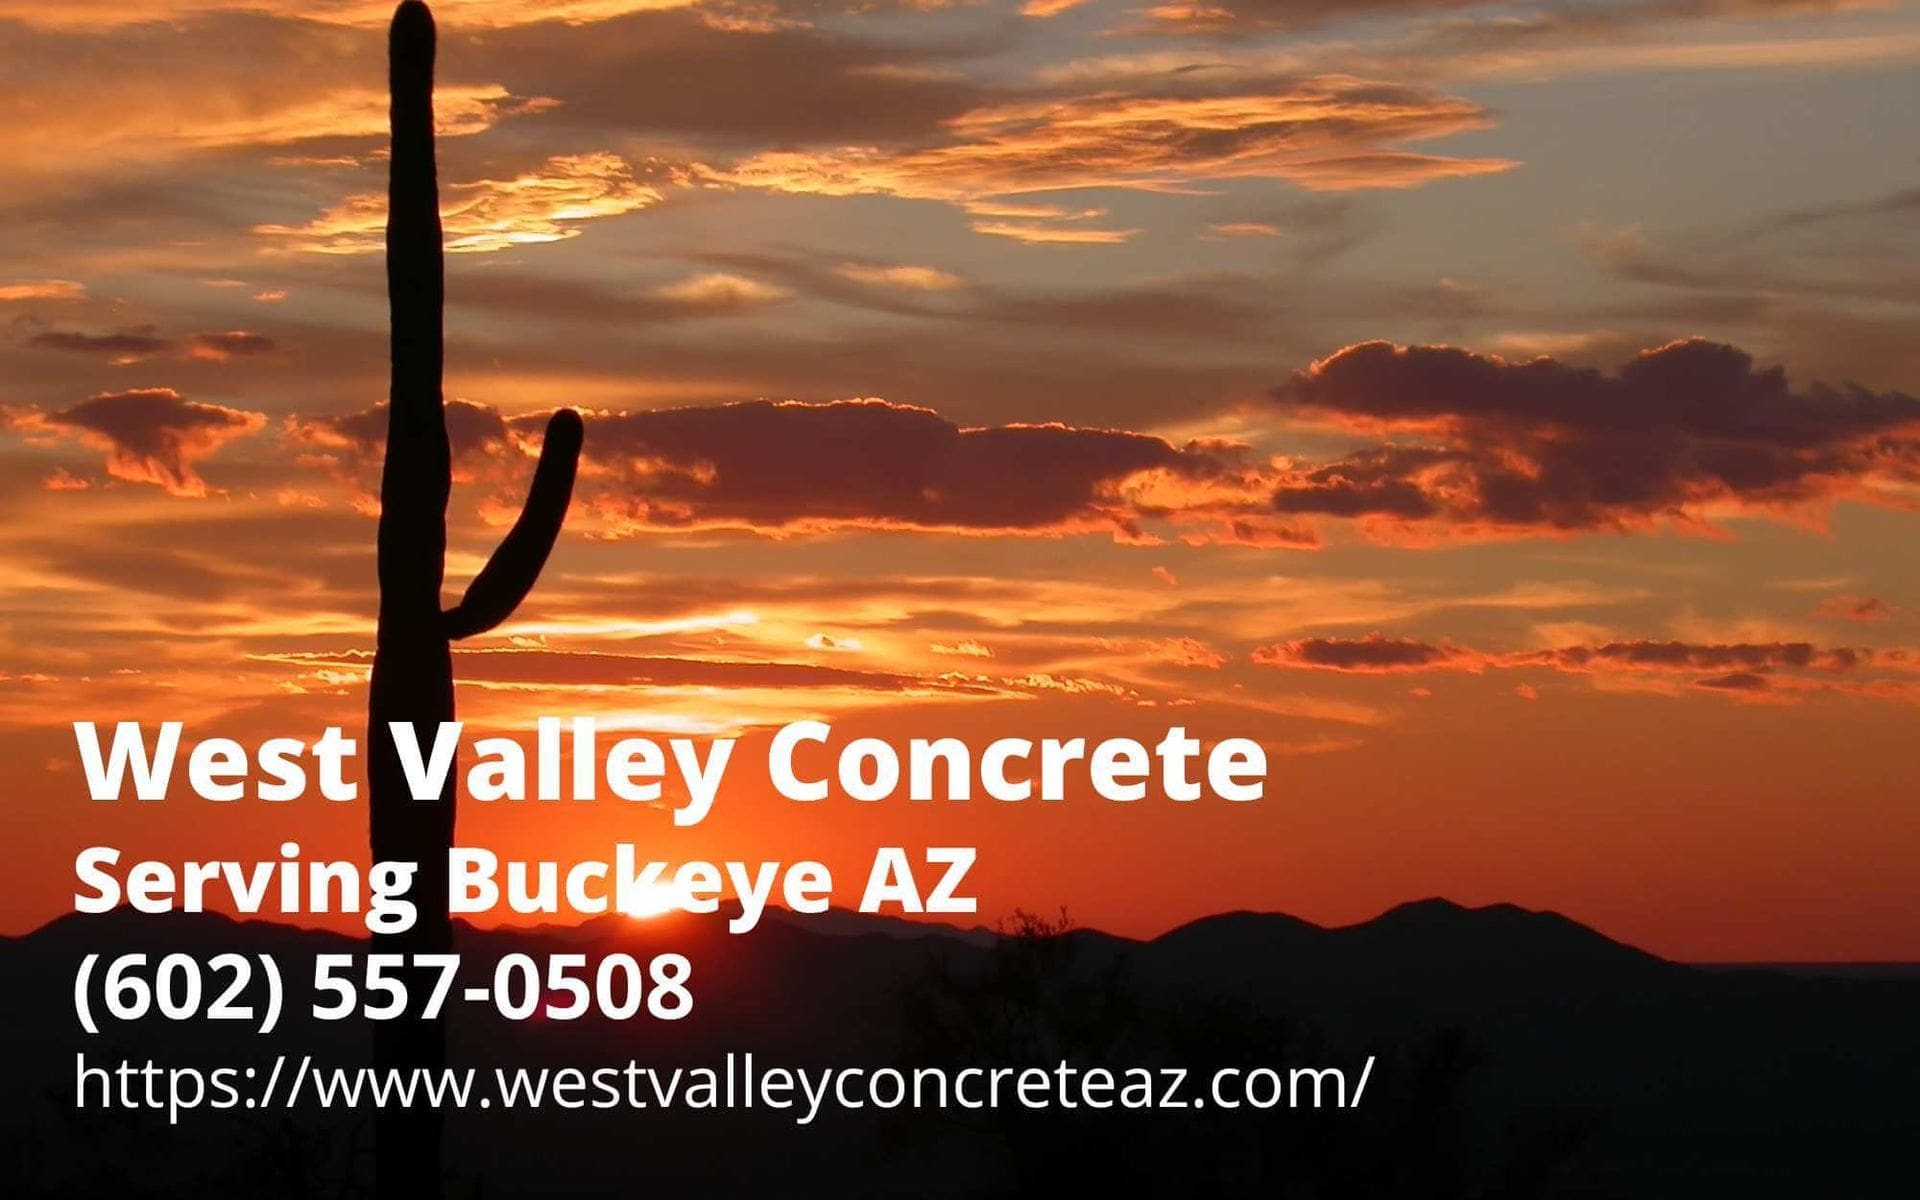 contact details of West Valley Concrete - a concrete company serving Buckeye, AZ